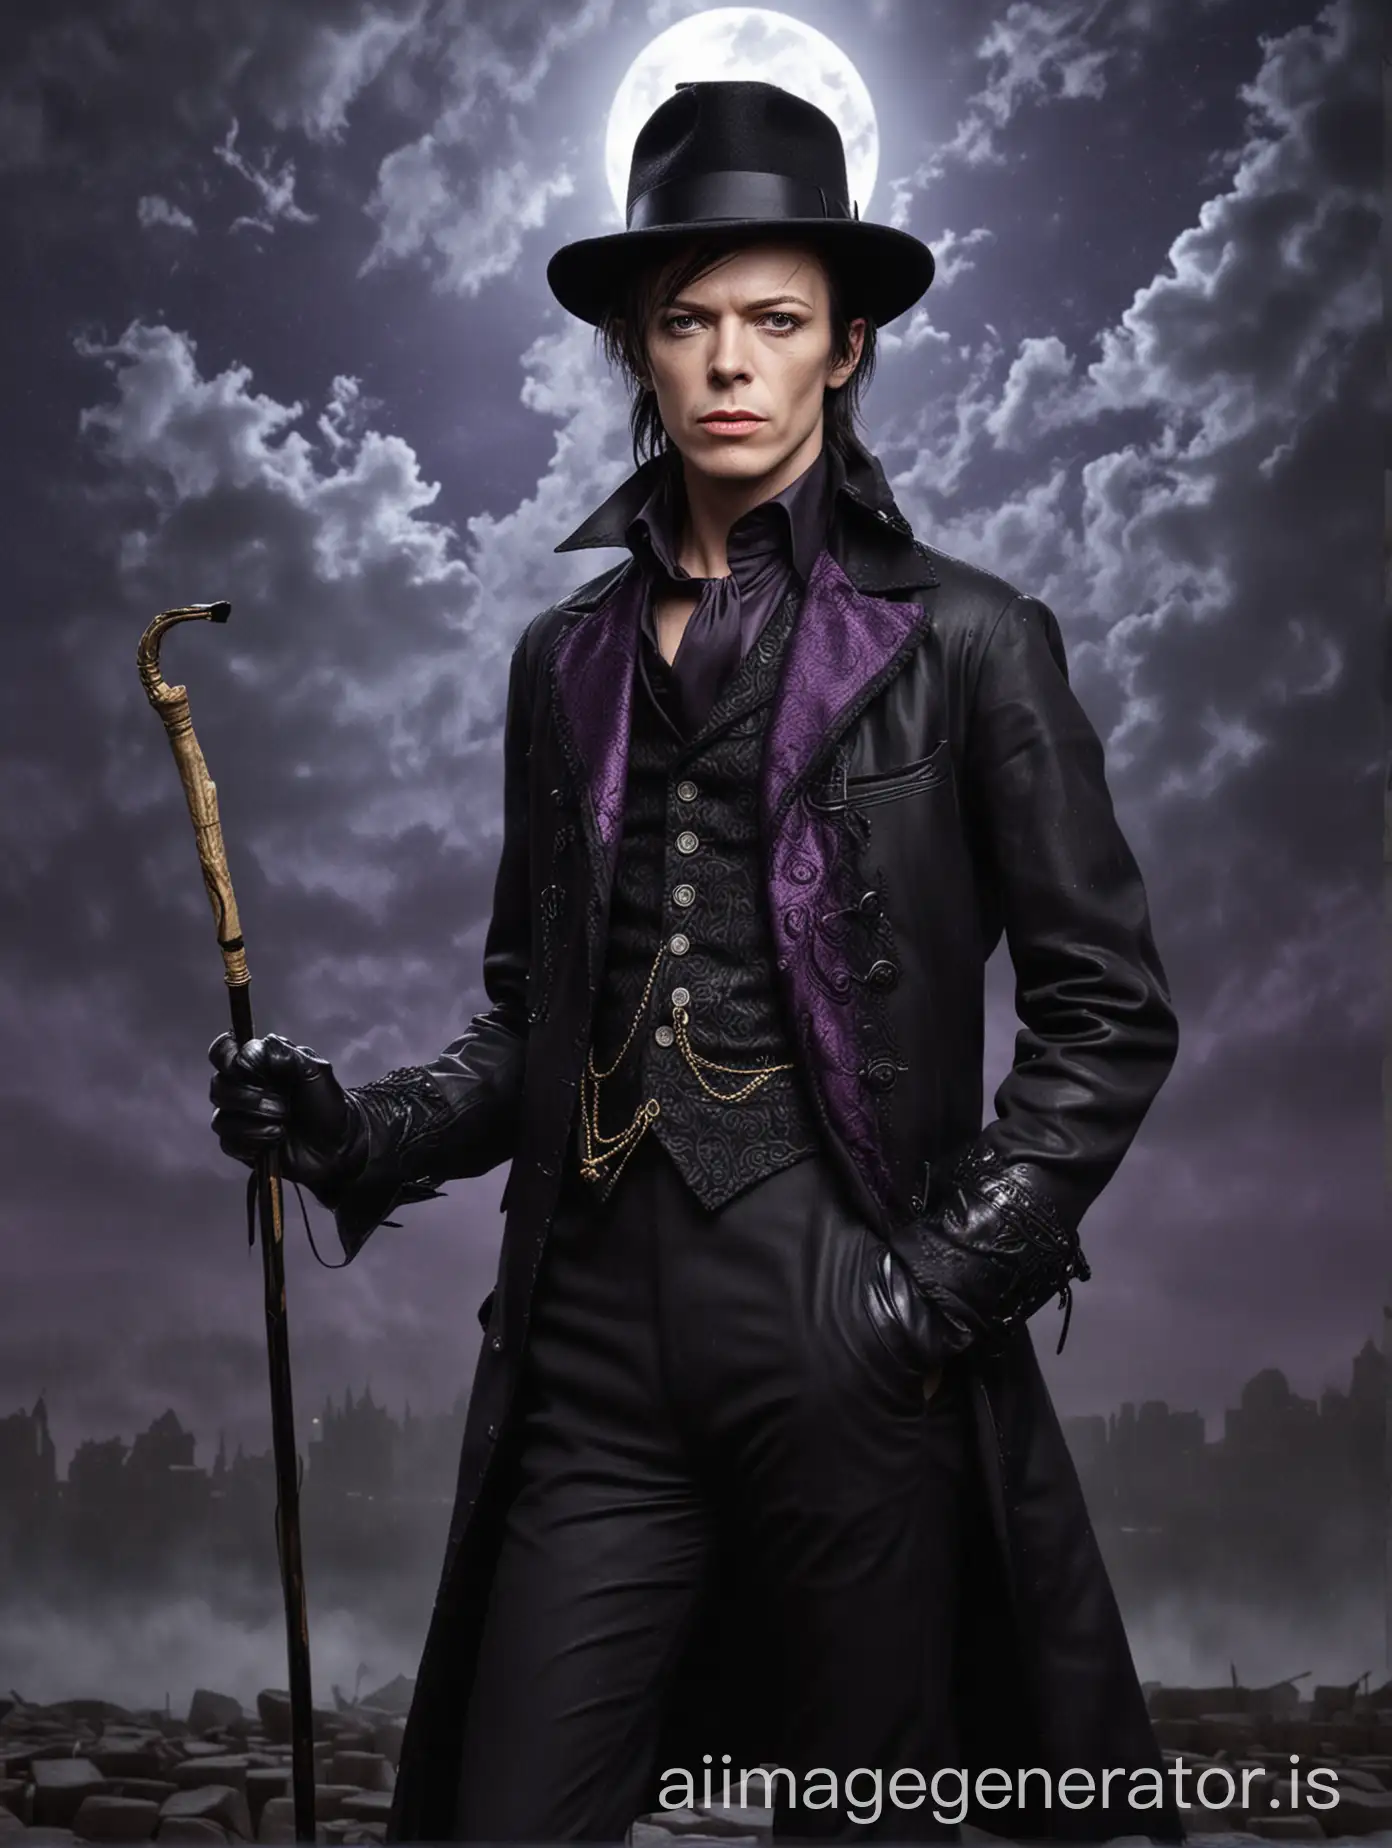 david bowie face, young man in his teens, man wearing black leather gloves, black hair, disgust face expression, wearing black homburg hat, juvenile face, slender young man with a black hair, man holding a black cane with a silver handle, man wearing black linen suit, purple paisley vest, midnight background with a stormy black clouds, crescent-shape moon, crow on the cround, old city background, wet stone bricks